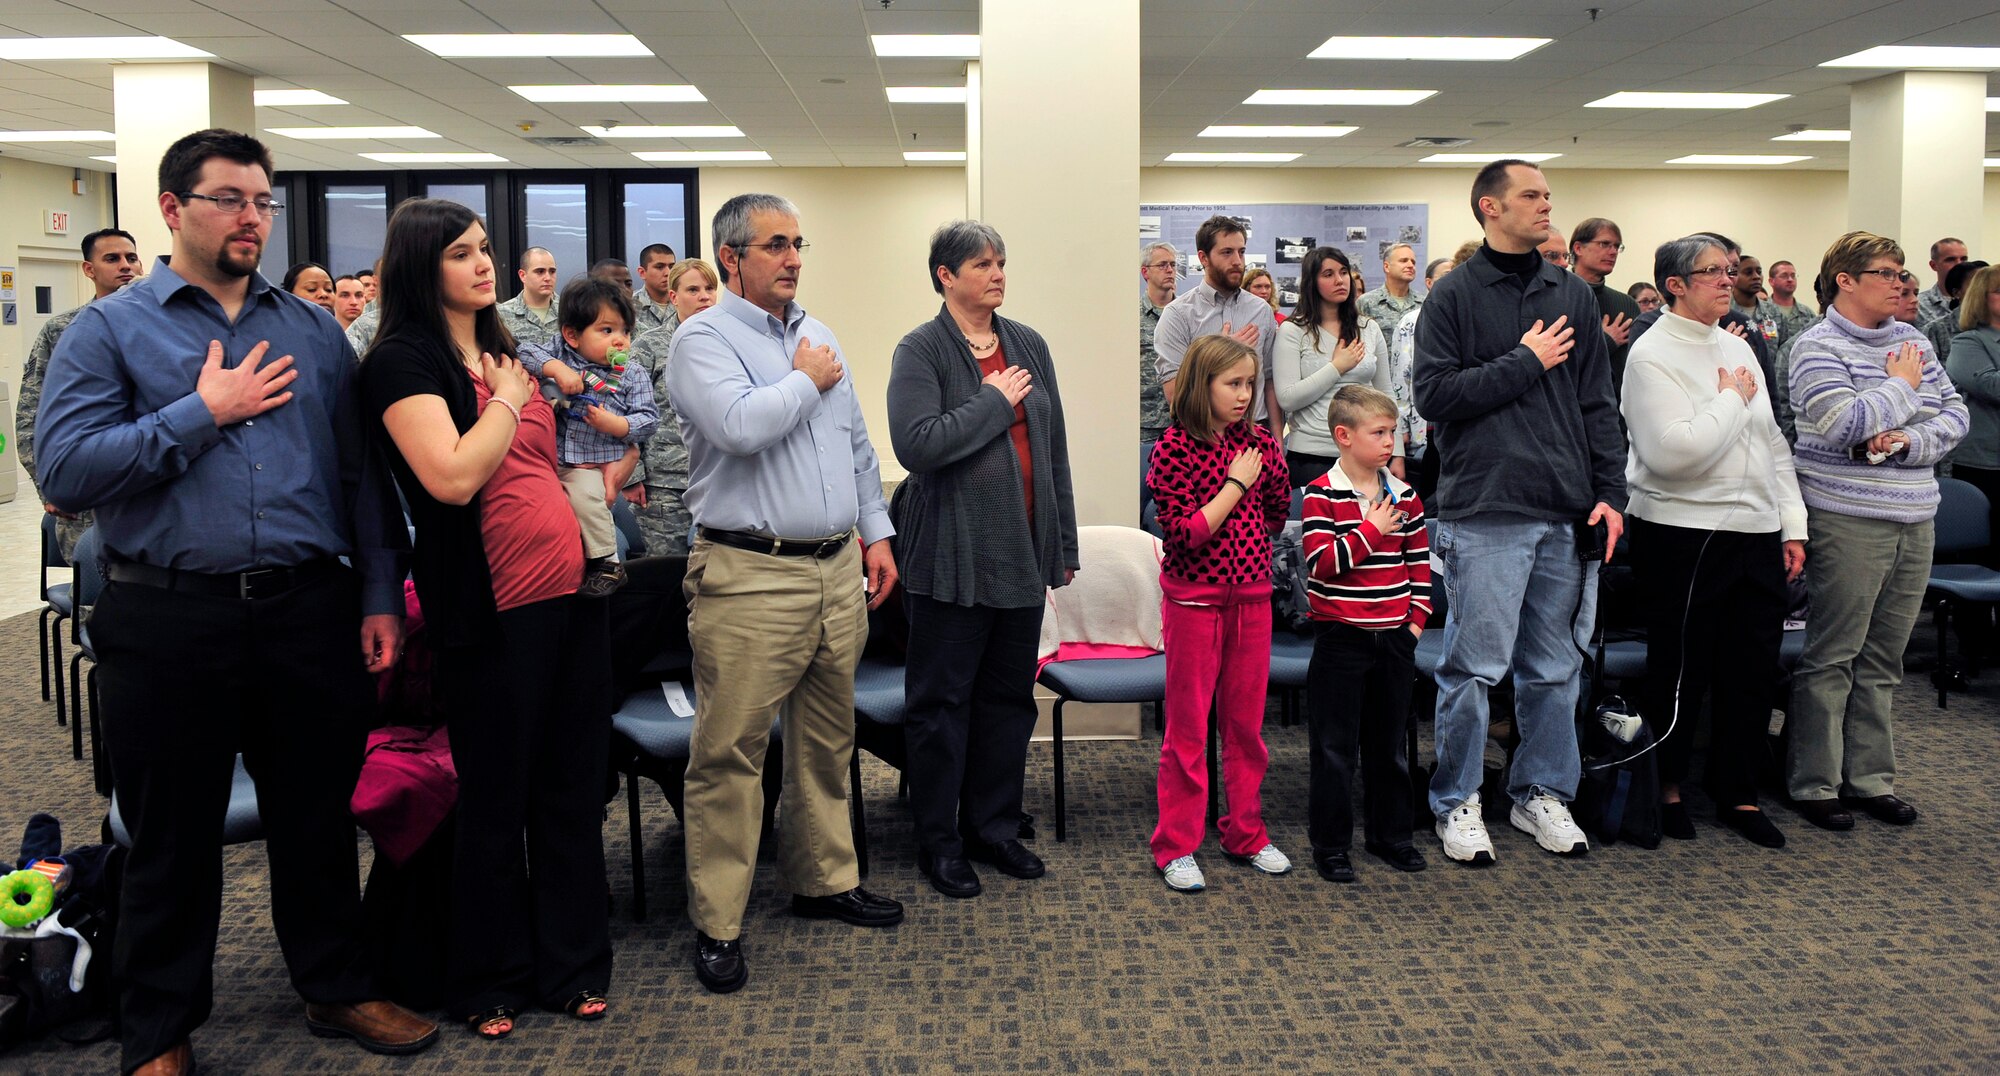 Seventeen Family members of the late Rodney Deltgen stand during the singing of the National Anthem in the hospital auditorium Feb. 10. (U.S. Air Force photo/ Staff Sgt. Stephenie Wade)